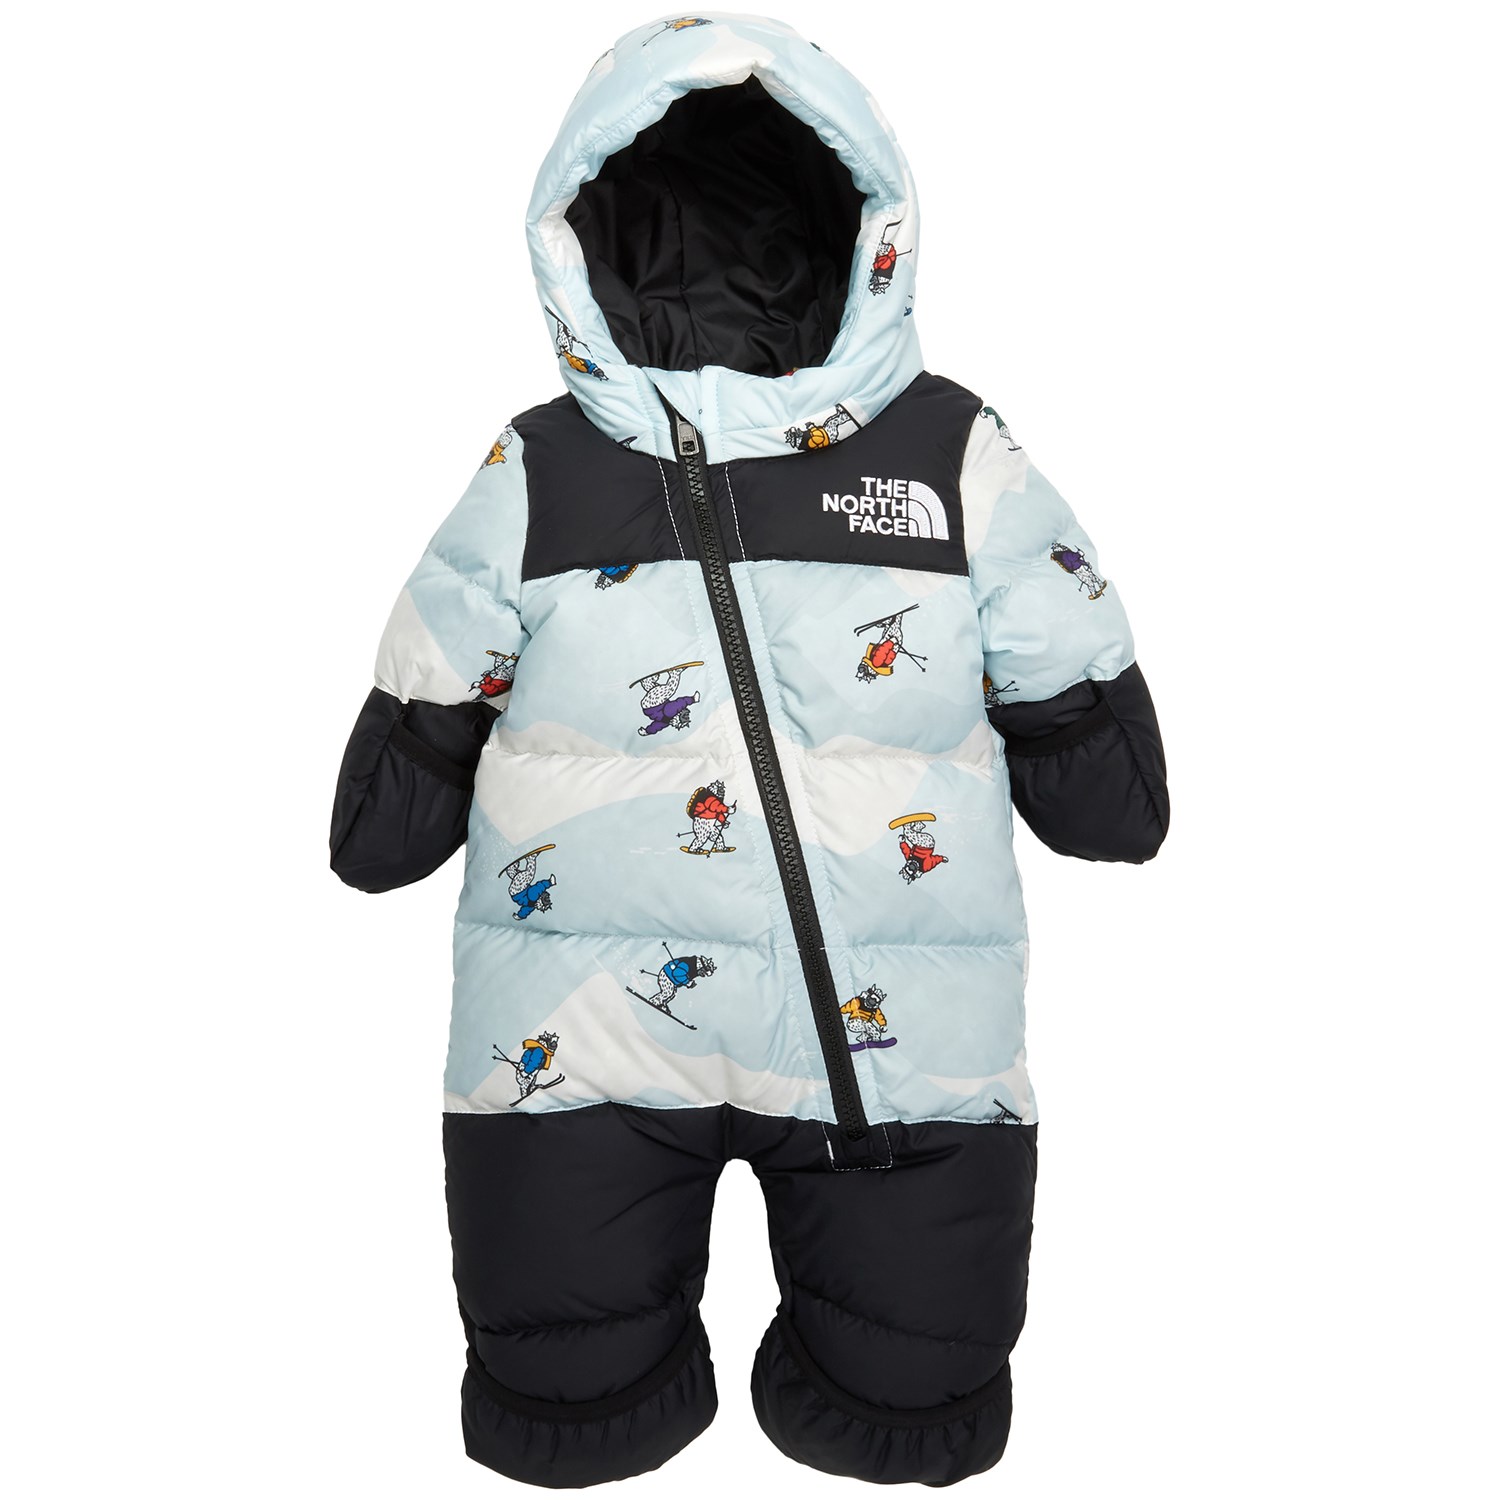 The North Face Nuptse Onepiece - Infants' | evo Canada